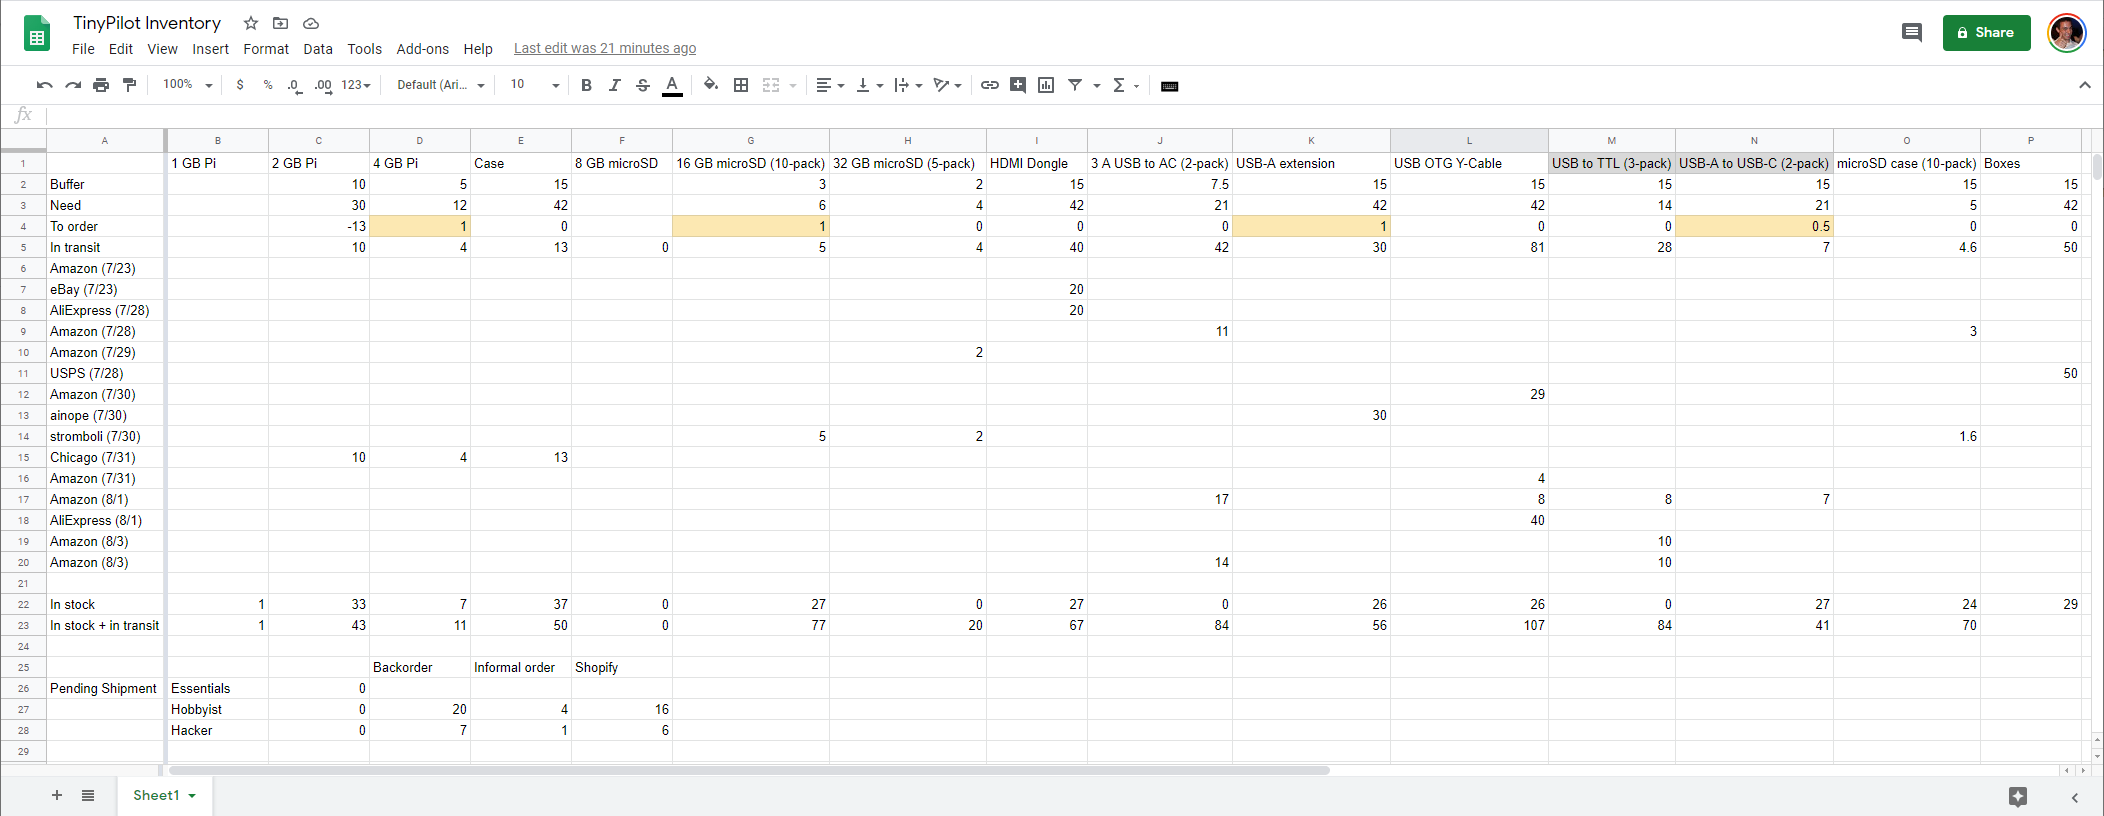 Screenshot of old, cluttered inventory spreadsheet